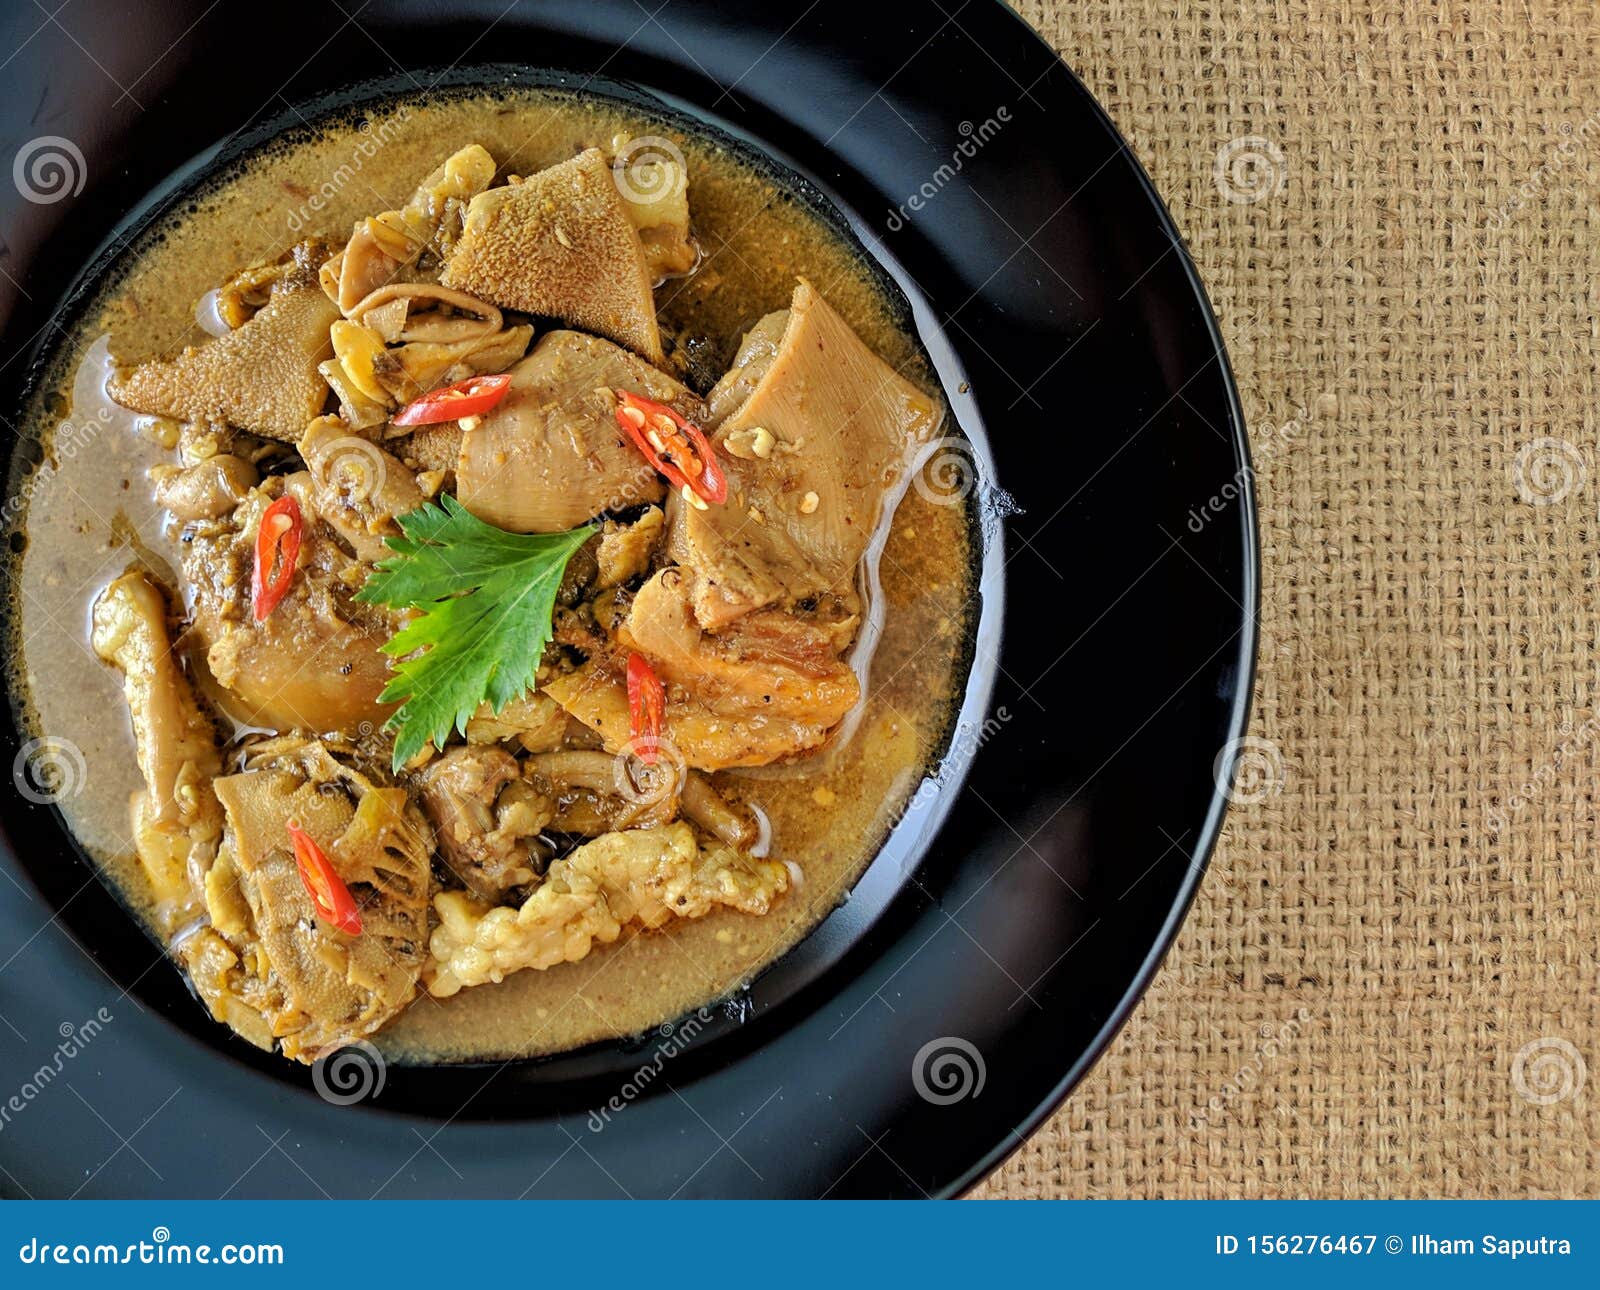 Gulai Kambing Is Indonesian Traditional Food Type Of Food Containing Rich Spicy And Succulent Curry Like Sauce Stock Image Image Of Javanese Lunch 156276467